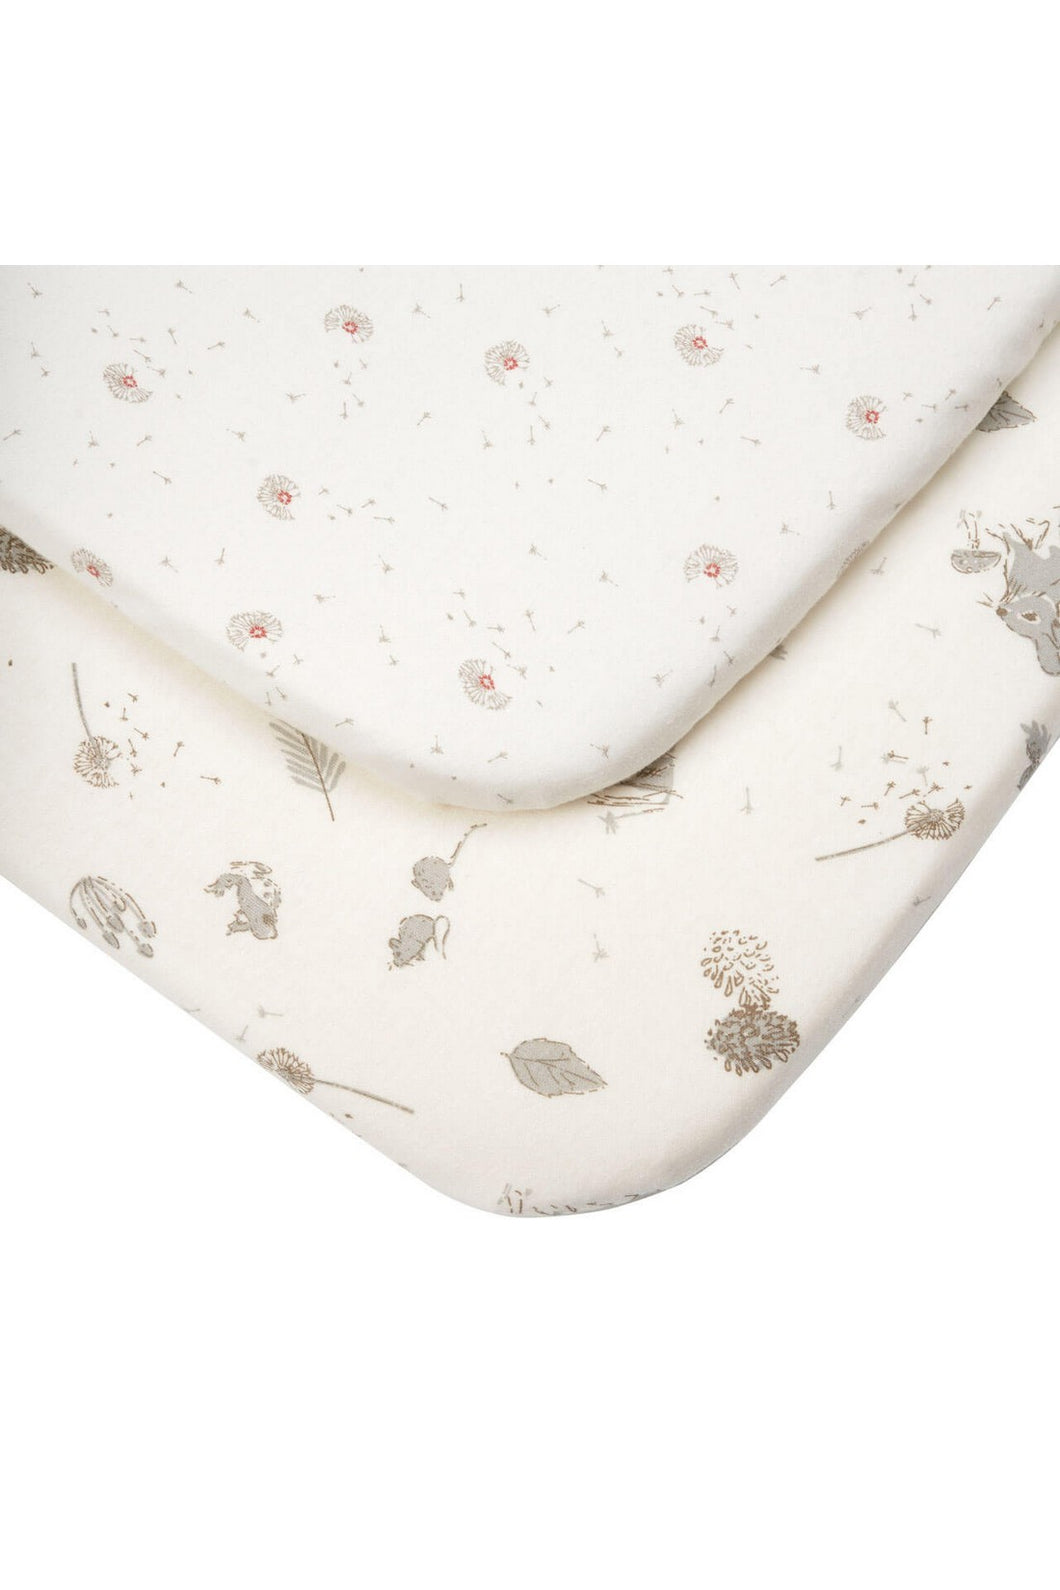 Tutti Bambini CoZee Bedside Crib Fitted Sheets 2 Pack - Cocoon